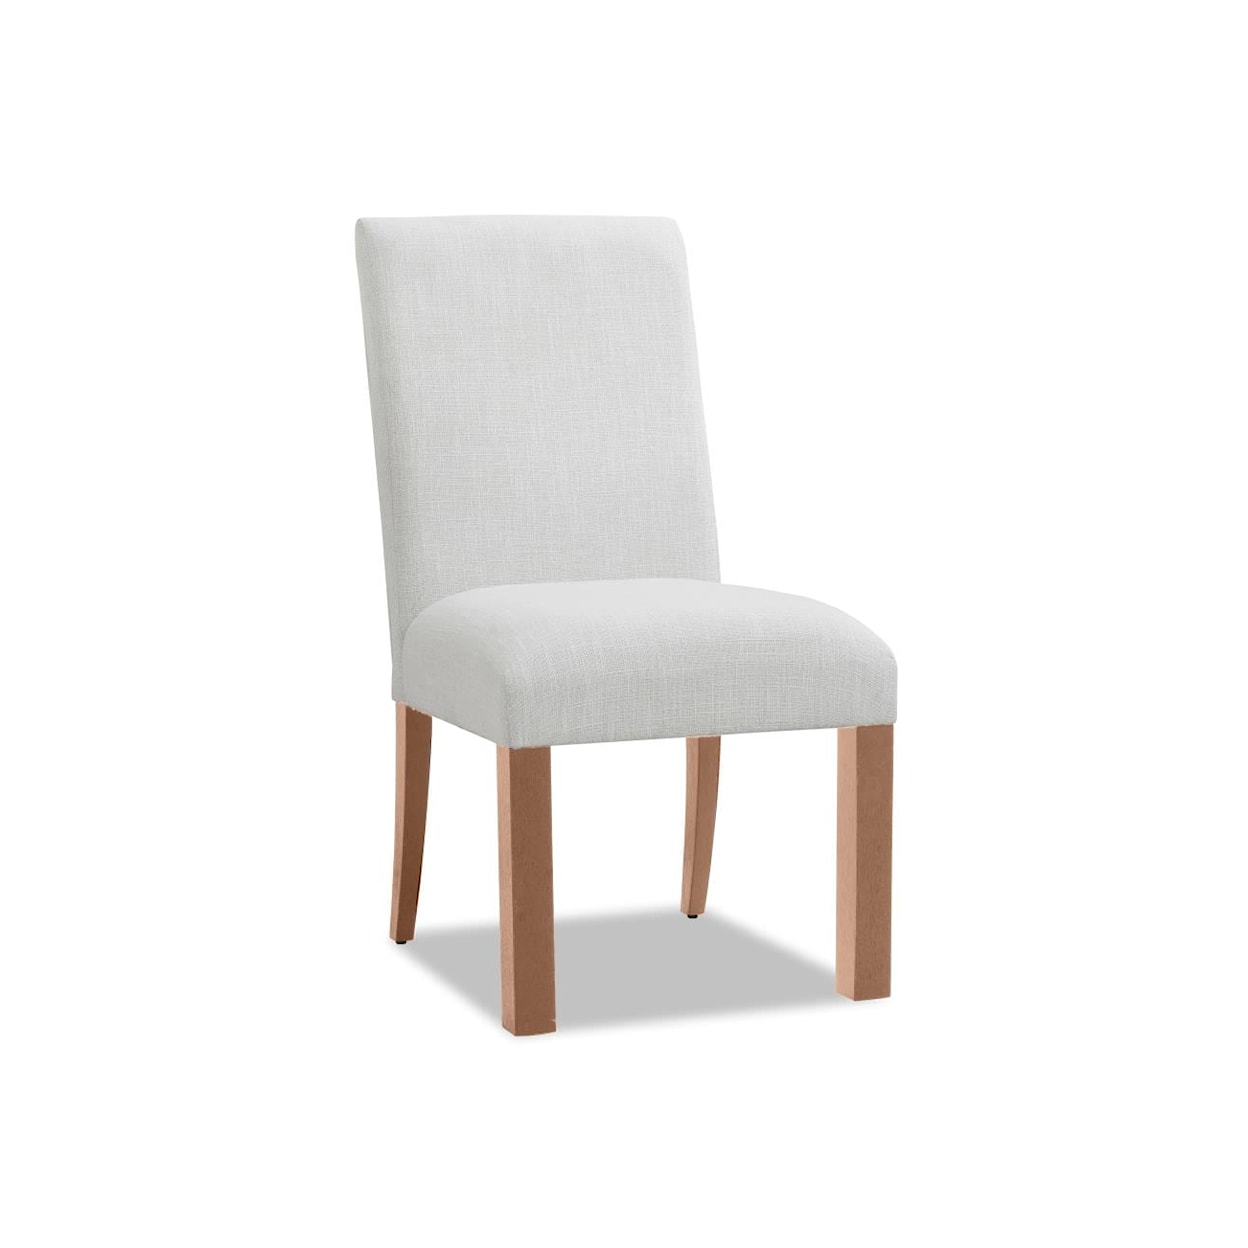 Trisha Yearwood Home Collection by Legacy Classic Today's Traditions Upholstered Side Chair